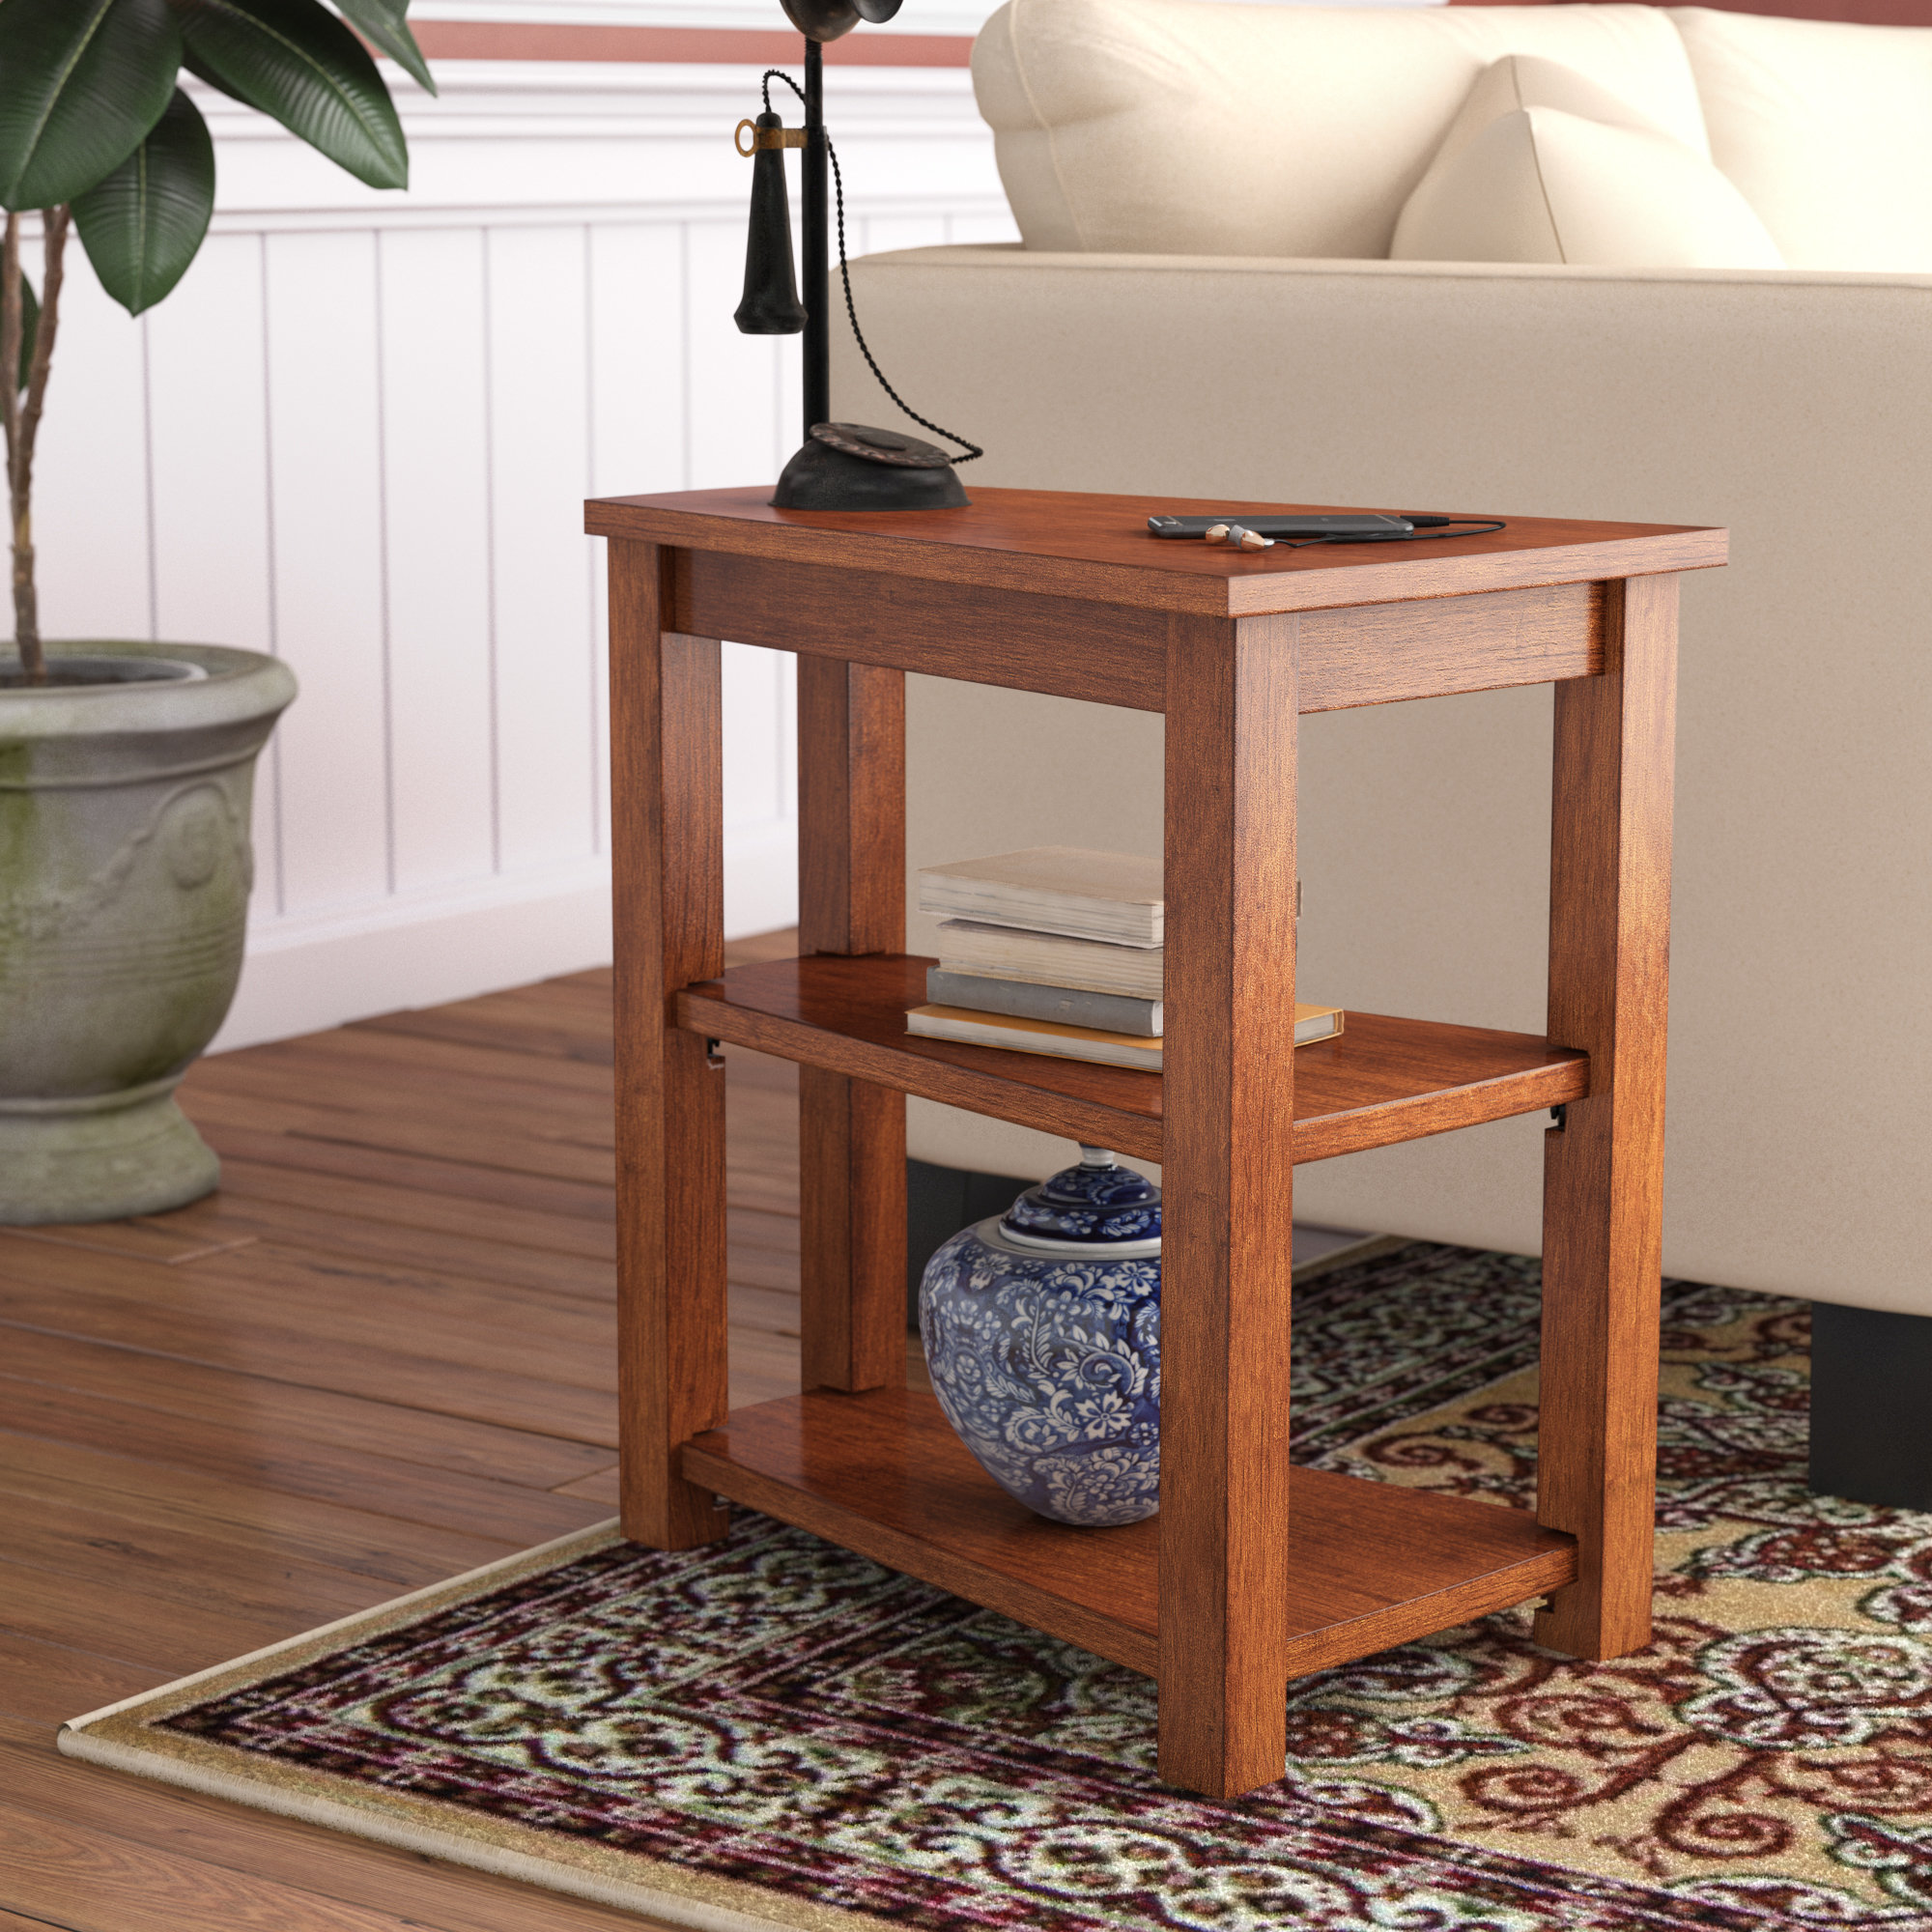 small end tables you love morristown table patchen accent target coffee with wheels garden stool side home decor mirrors winsome custom upholstered chairs modern furniture and